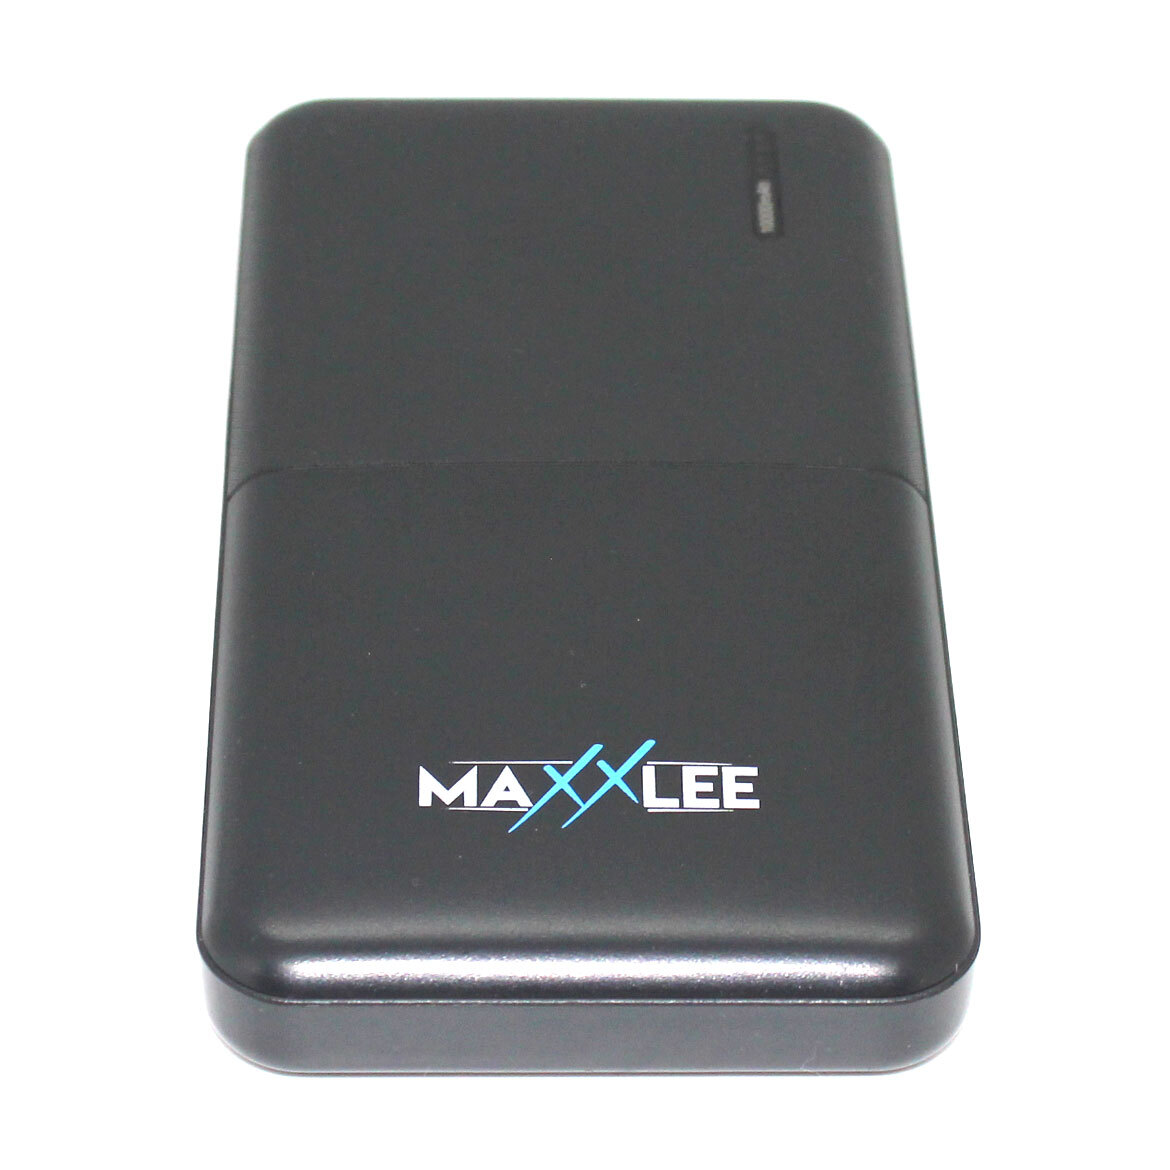 Maxxlee 10000mAh Power Bank Dual USB External Portable Battery Charger IPhone Android Mobile BLACK